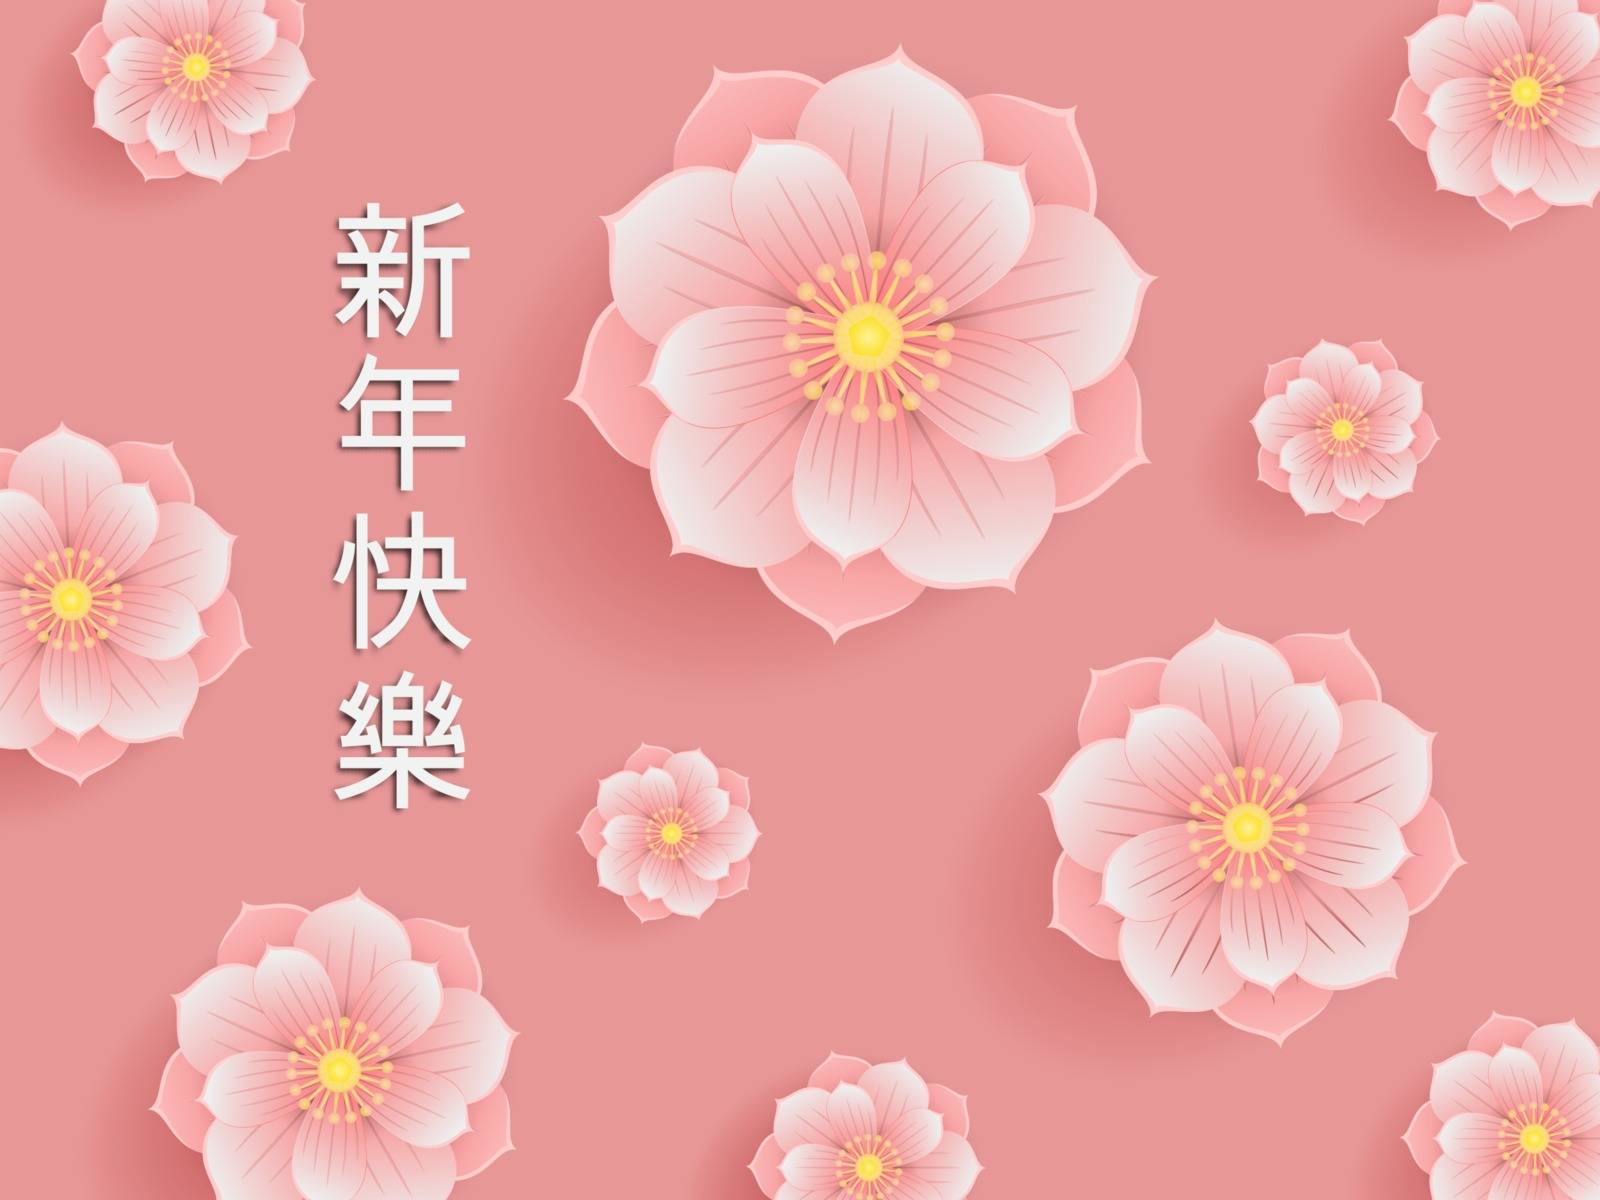 Pink flowers illustration with Chinese calligraphy in pink background. Chinese wording: Happy New Year